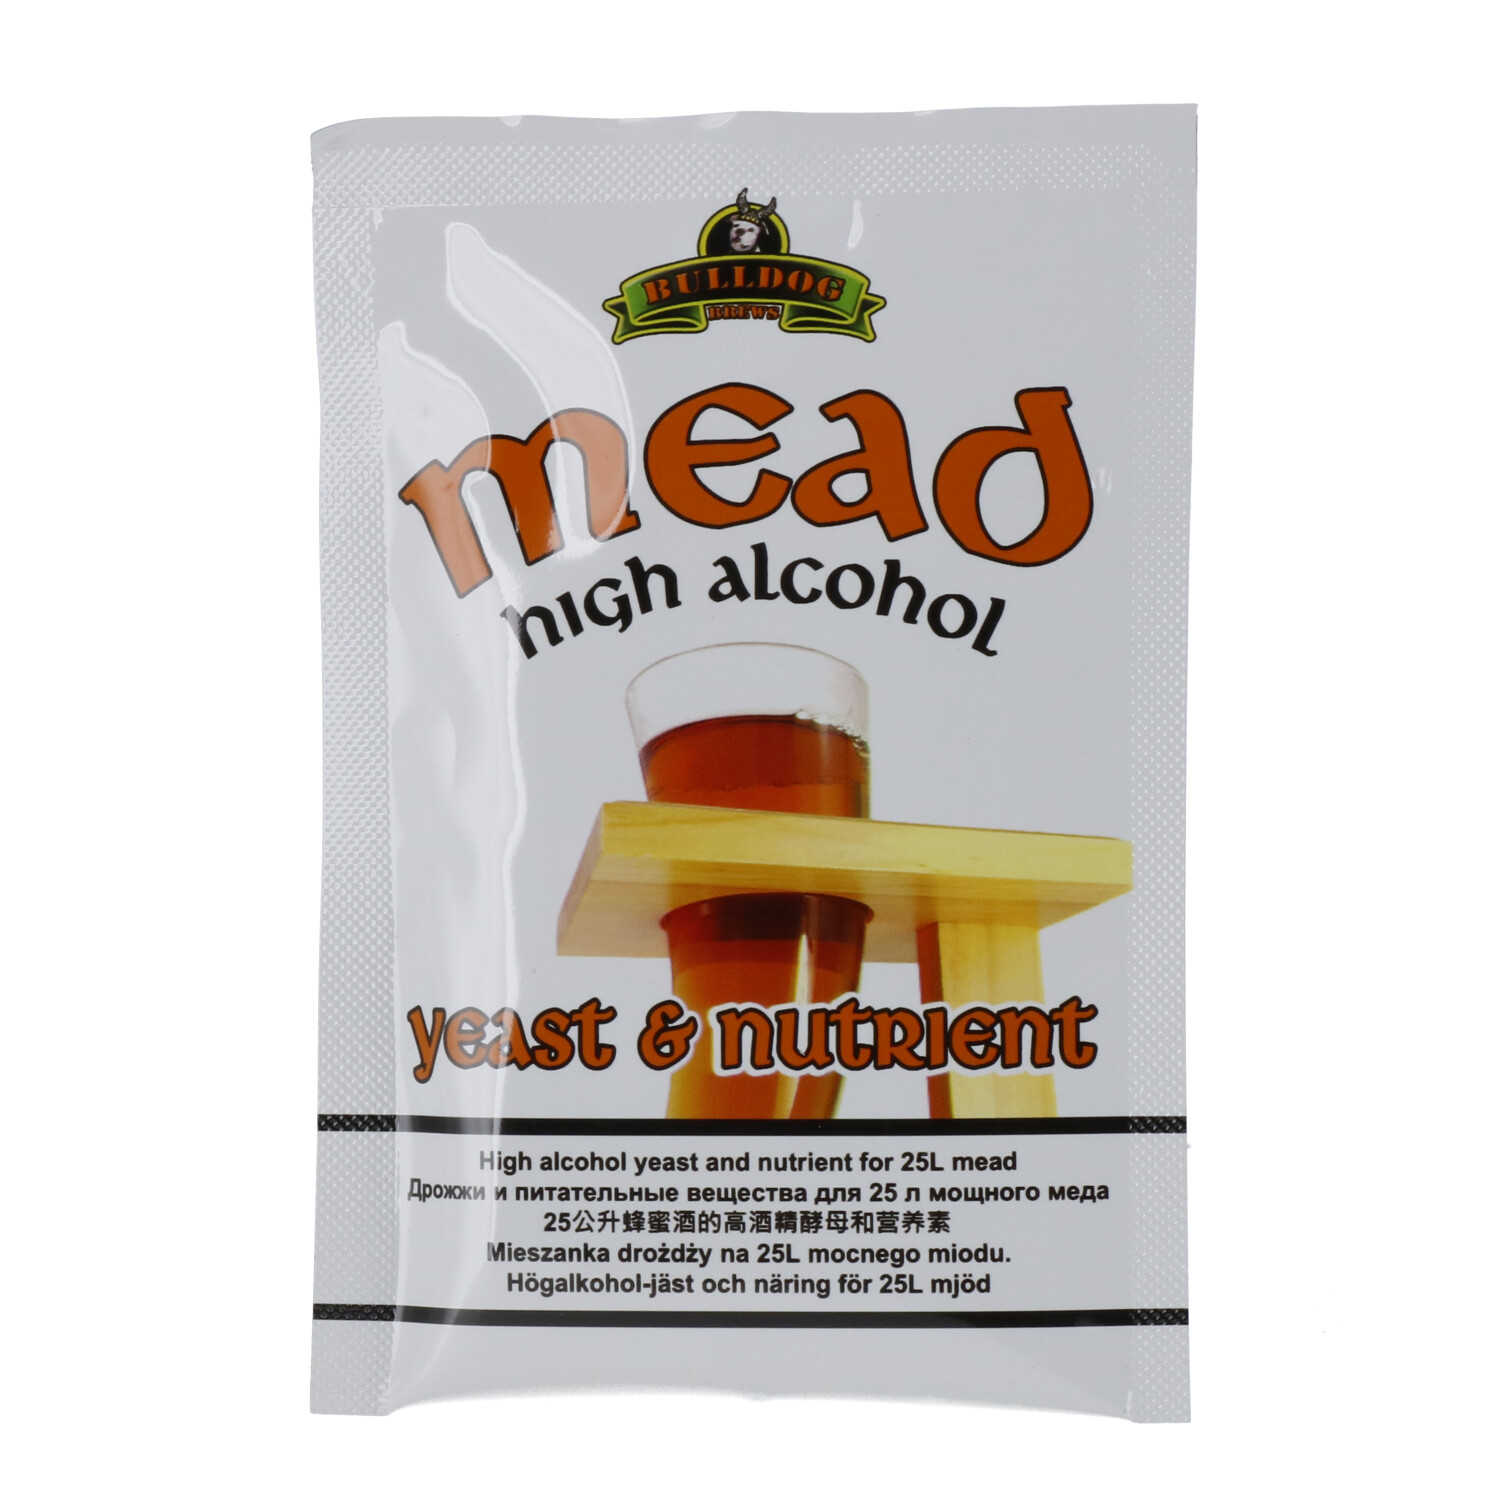 Bulldog Mead Yeast High Alcohol incl. nutrient